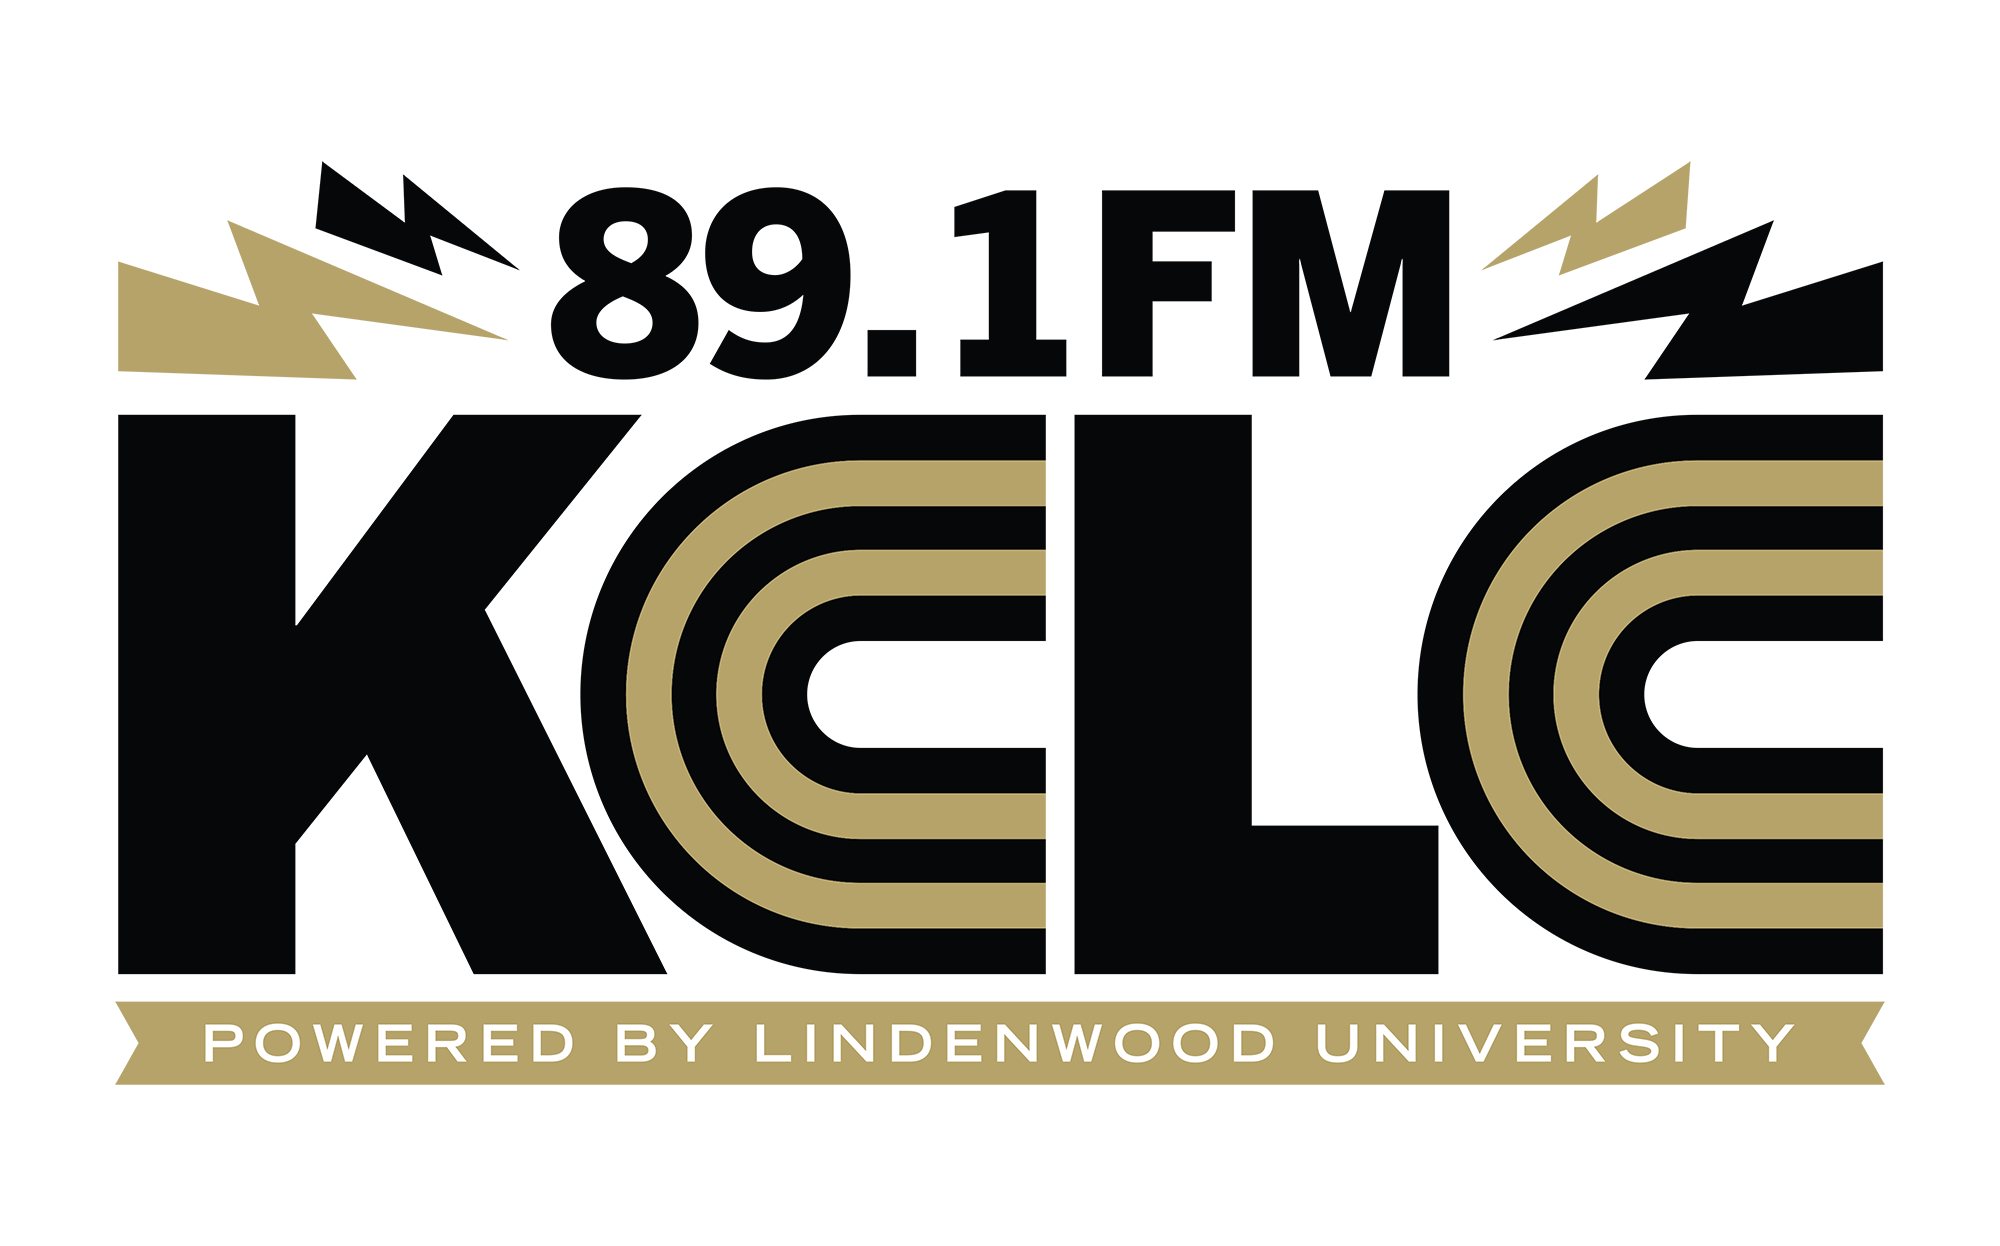 89.1 FM KCLC - Commercial Free Music